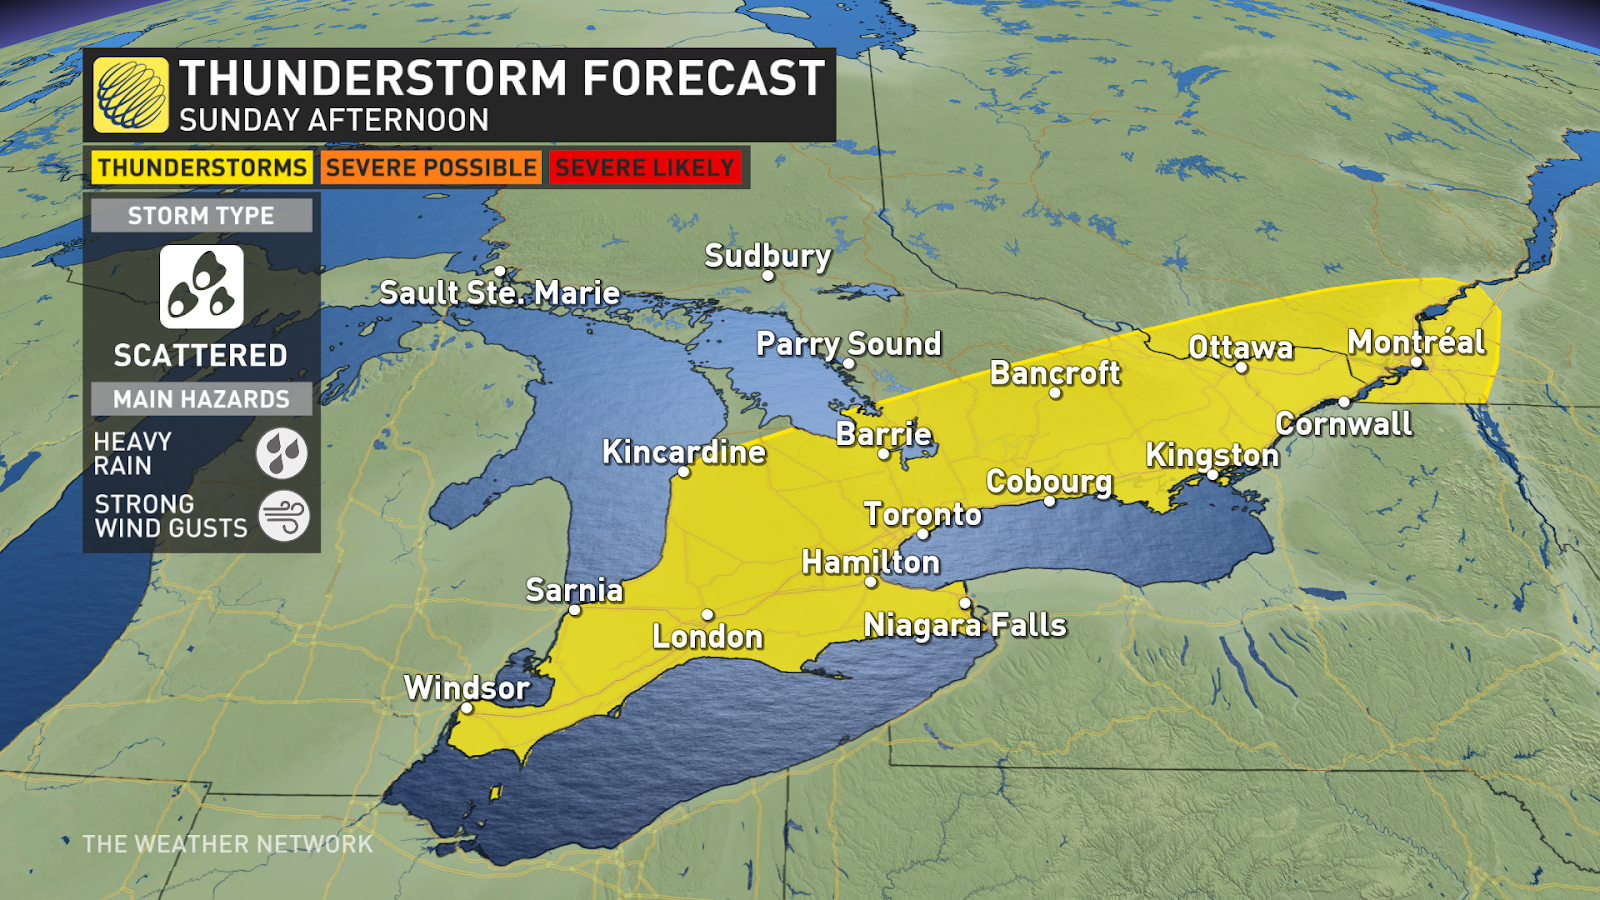 southern ontario faces overnight storm threat, summery sunday